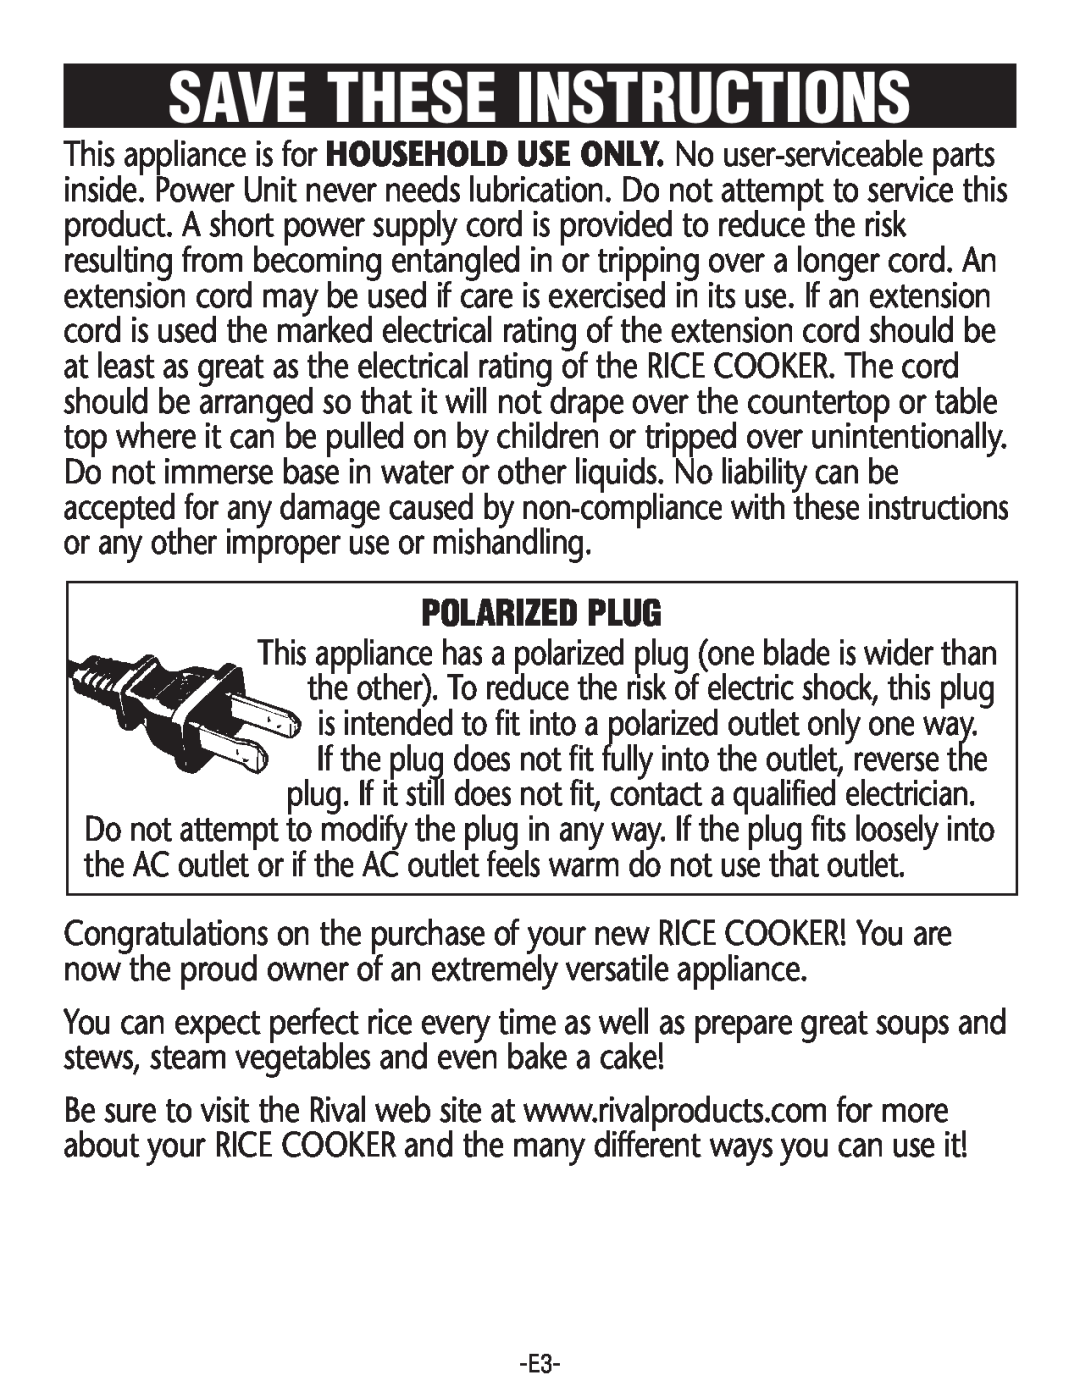 Rival RC101, RC100 manual Save These Instructions, Polarized Plug 